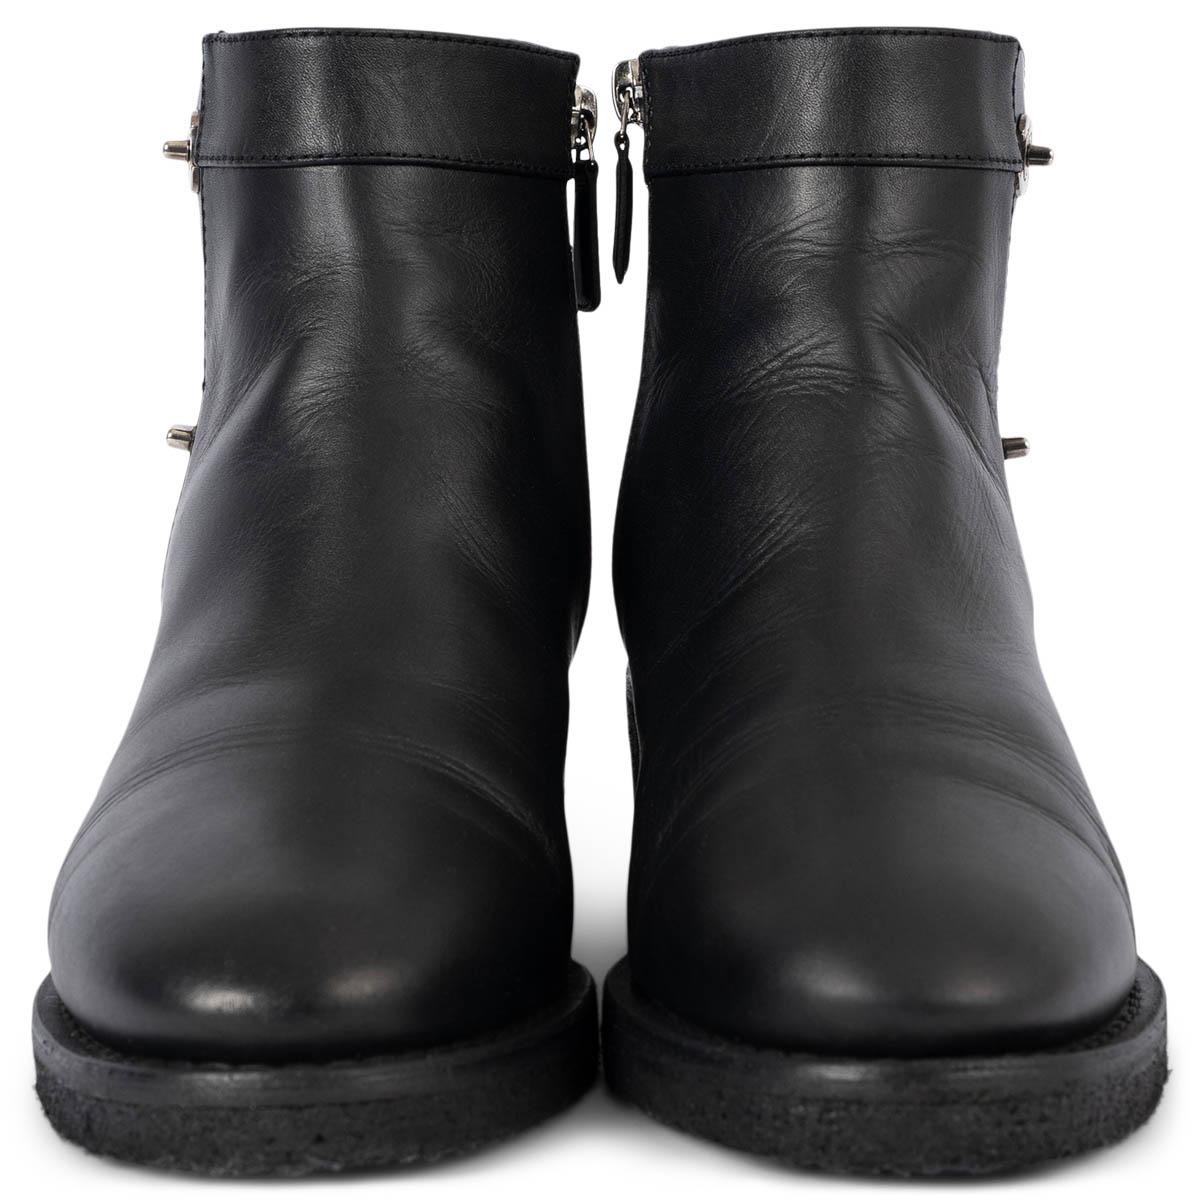 100% authentic Chanel ankle-boots in black smooth calfskin featuring silver-tone metal CC turn-lock closure. Open with zipper on the inside. Have been worn and are in excellent condition. Come with dust bag. 

REV Collection

Measurements
Model	REV